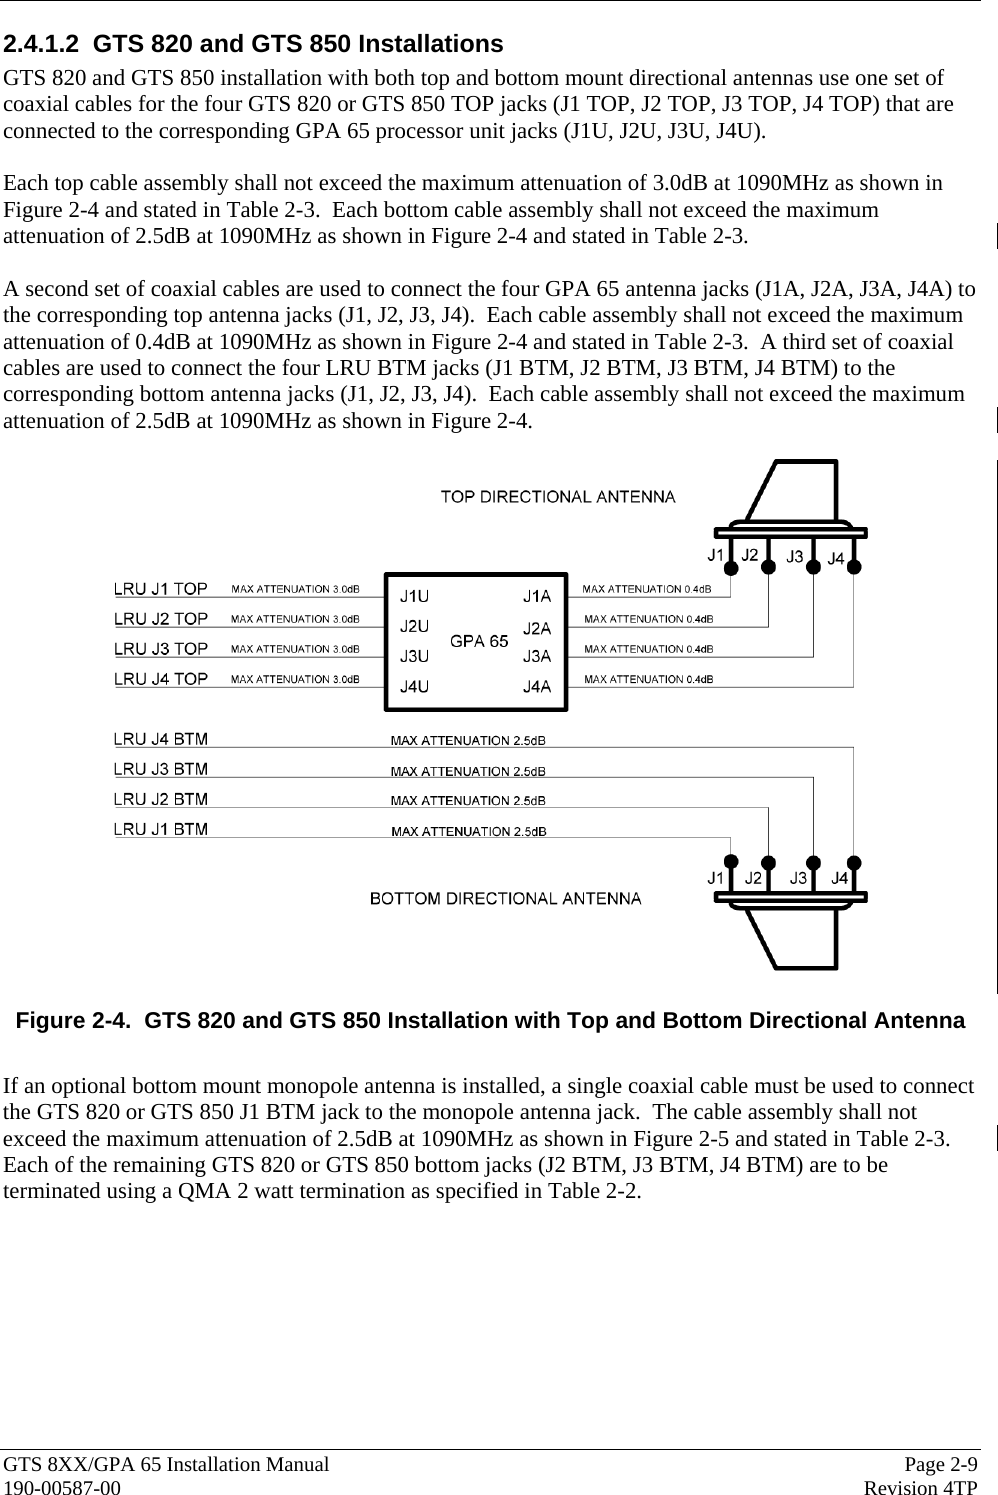  GTS 8XX/GPA 65 Installation Manual  Page 2-9 190-00587-00  Revision 4TP 2.4.1.2  GTS 820 and GTS 850 Installations GTS 820 and GTS 850 installation with both top and bottom mount directional antennas use one set of coaxial cables for the four GTS 820 or GTS 850 TOP jacks (J1 TOP, J2 TOP, J3 TOP, J4 TOP) that are connected to the corresponding GPA 65 processor unit jacks (J1U, J2U, J3U, J4U).    Each top cable assembly shall not exceed the maximum attenuation of 3.0dB at 1090MHz as shown in Figure 2-4 and stated in Table 2-3.  Each bottom cable assembly shall not exceed the maximum attenuation of 2.5dB at 1090MHz as shown in Figure 2-4 and stated in Table 2-3.    A second set of coaxial cables are used to connect the four GPA 65 antenna jacks (J1A, J2A, J3A, J4A) to the corresponding top antenna jacks (J1, J2, J3, J4).  Each cable assembly shall not exceed the maximum attenuation of 0.4dB at 1090MHz as shown in Figure 2-4 and stated in Table 2-3.  A third set of coaxial cables are used to connect the four LRU BTM jacks (J1 BTM, J2 BTM, J3 BTM, J4 BTM) to the corresponding bottom antenna jacks (J1, J2, J3, J4).  Each cable assembly shall not exceed the maximum attenuation of 2.5dB at 1090MHz as shown in Figure 2-4.   Figure 2-4.  GTS 820 and GTS 850 Installation with Top and Bottom Directional Antenna  If an optional bottom mount monopole antenna is installed, a single coaxial cable must be used to connect the GTS 820 or GTS 850 J1 BTM jack to the monopole antenna jack.  The cable assembly shall not exceed the maximum attenuation of 2.5dB at 1090MHz as shown in Figure 2-5 and stated in Table 2-3.  Each of the remaining GTS 820 or GTS 850 bottom jacks (J2 BTM, J3 BTM, J4 BTM) are to be terminated using a QMA 2 watt termination as specified in Table 2-2.   